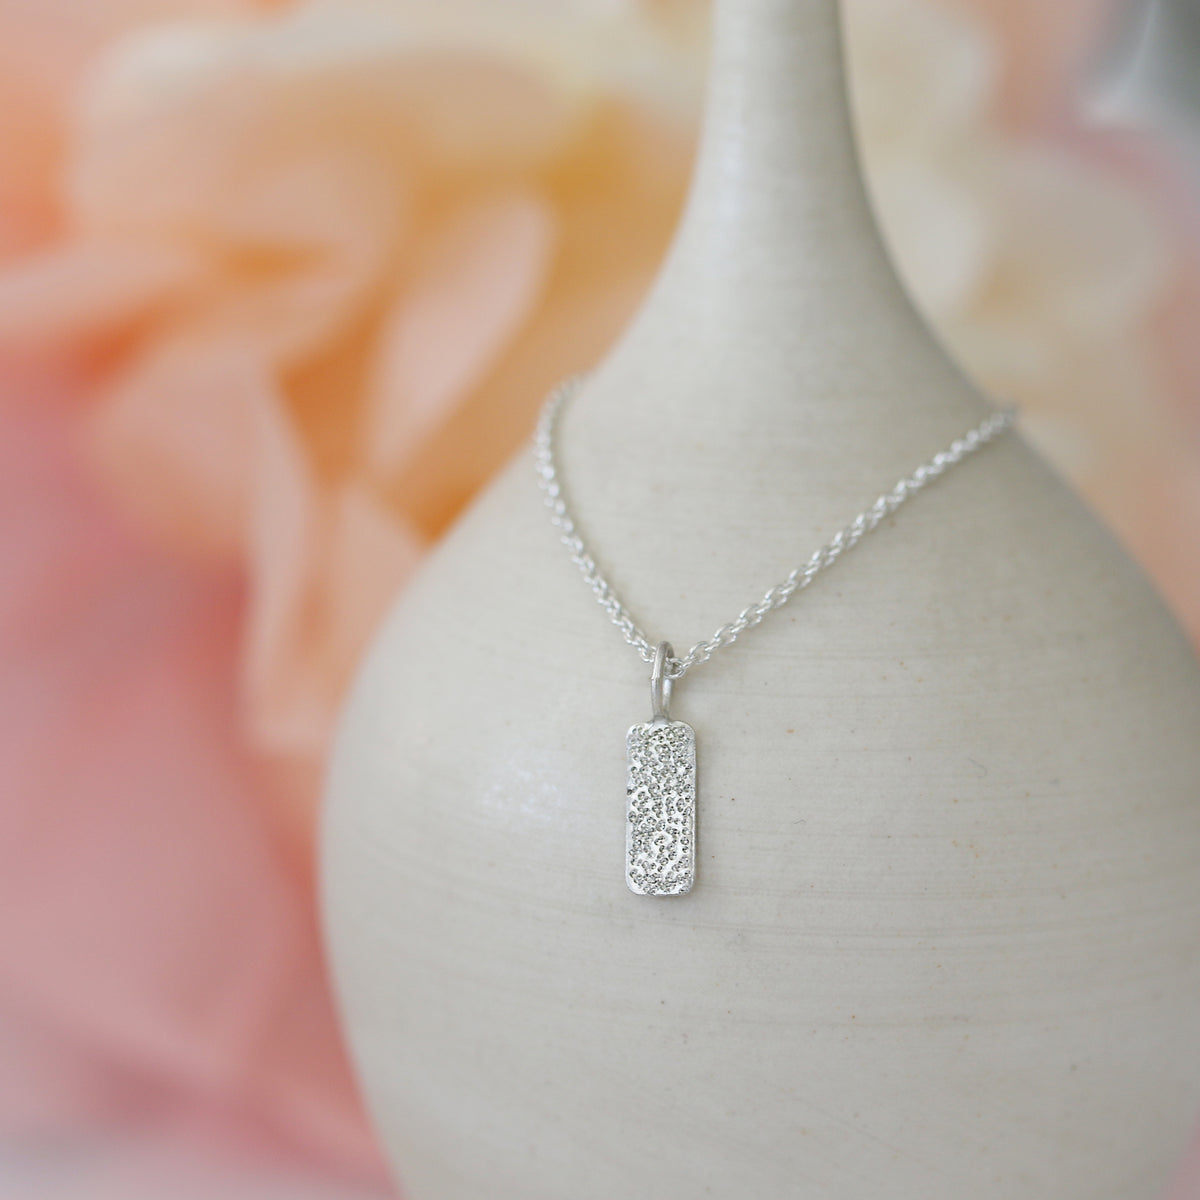 DIAMOND DUSTED ITTY-BITTY TAG NECKLACE